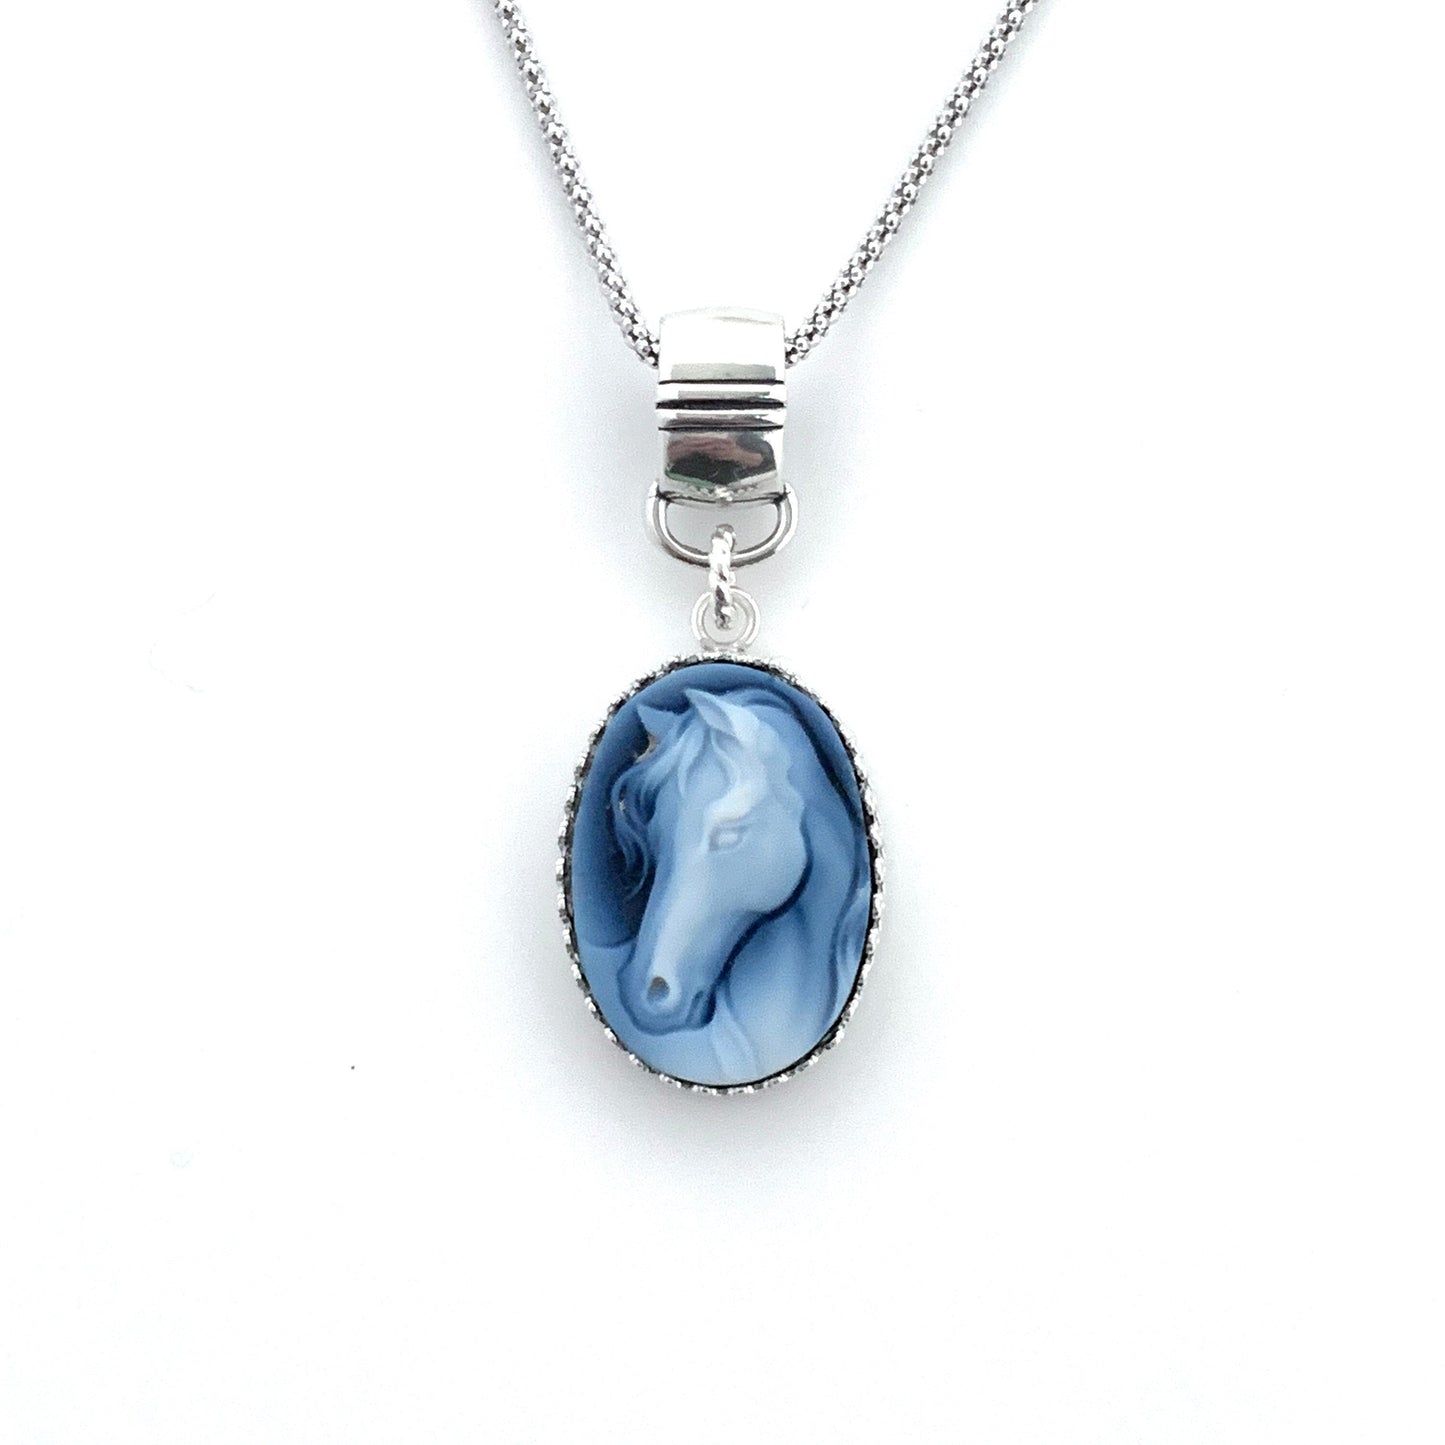 Blue Horse Cameo Necklace, Horse Jewelry, Sterling Silver Pendant, Equestrian Jewelry, Unique  Gifts for Women